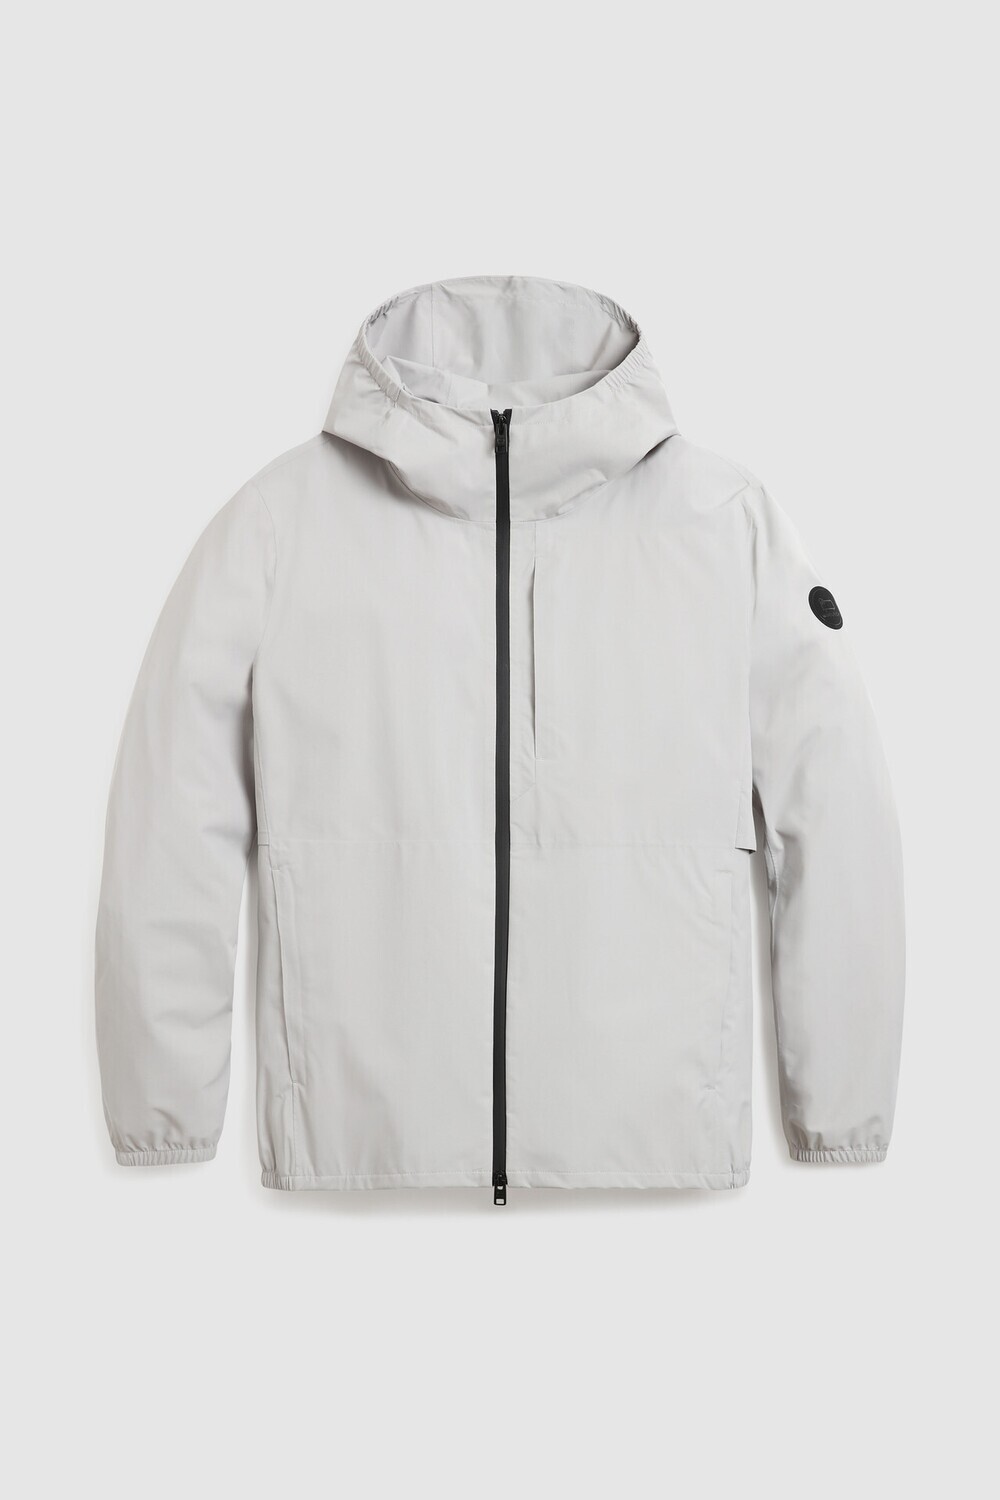 Woolrich Pacific Jack